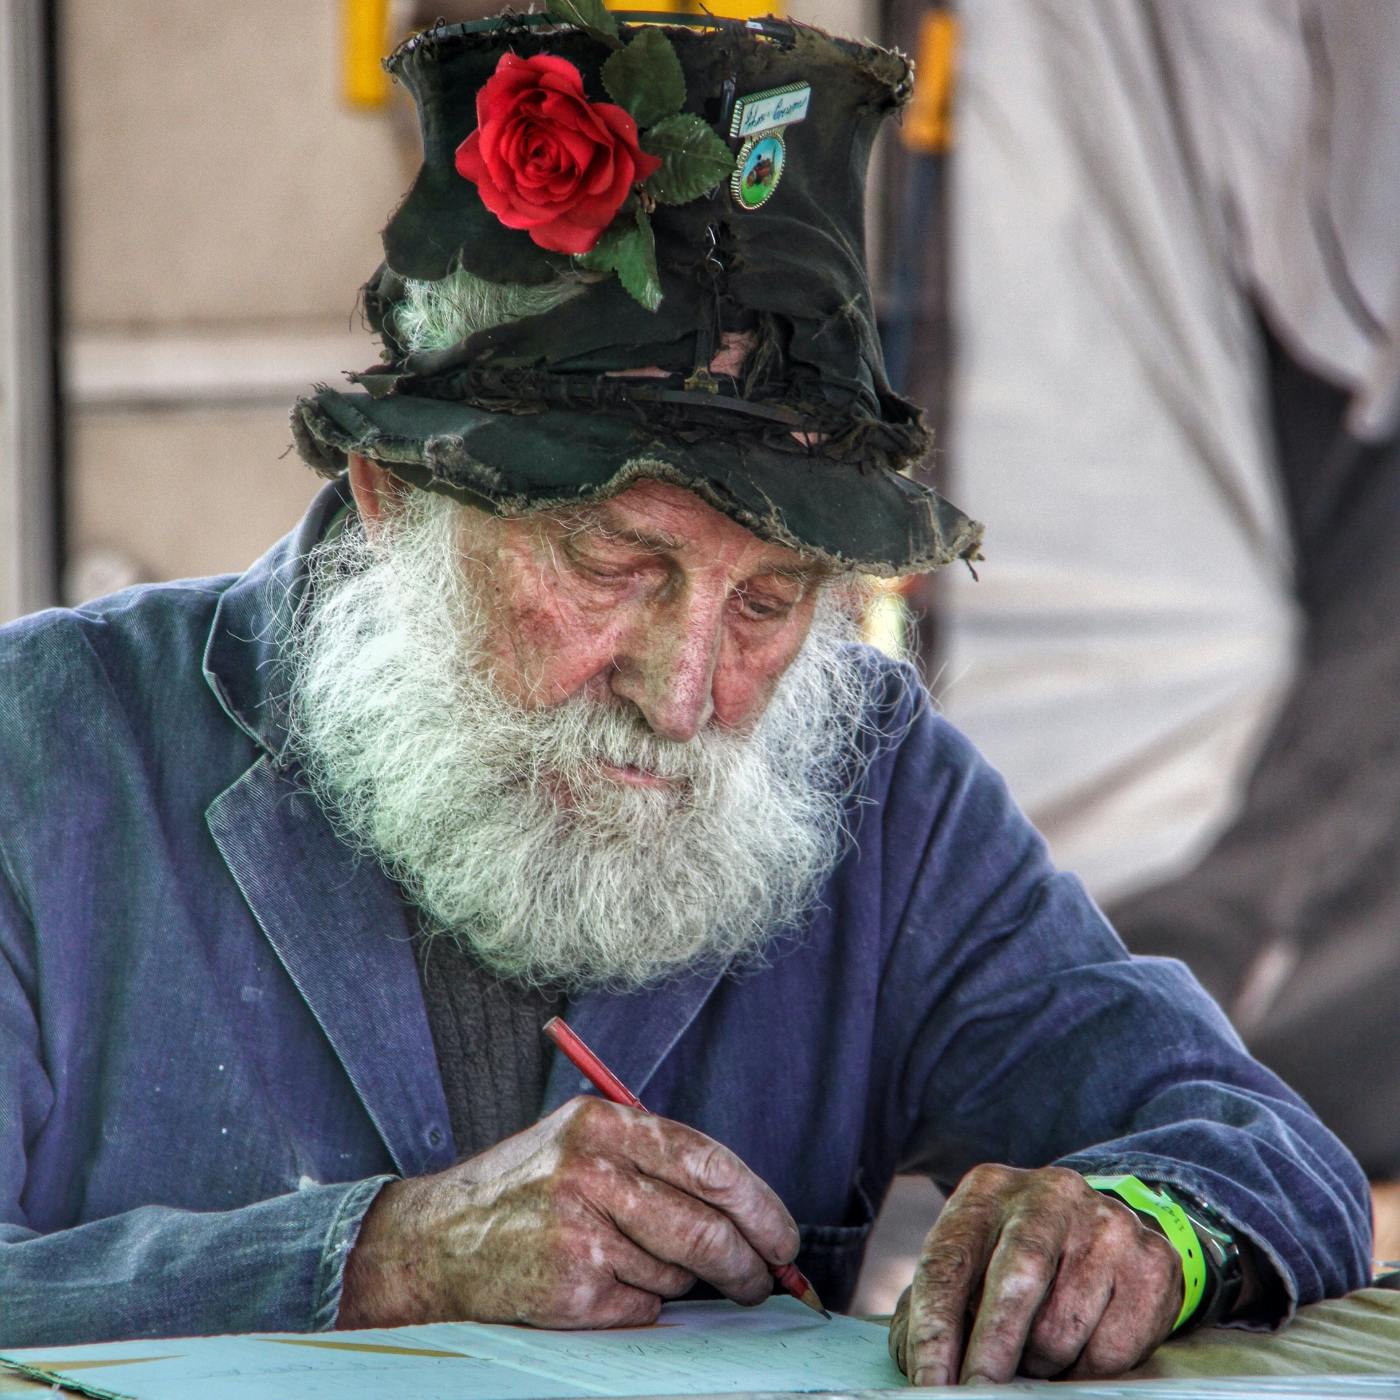 A white bearded gent with a rose in his hat writing with a pencil